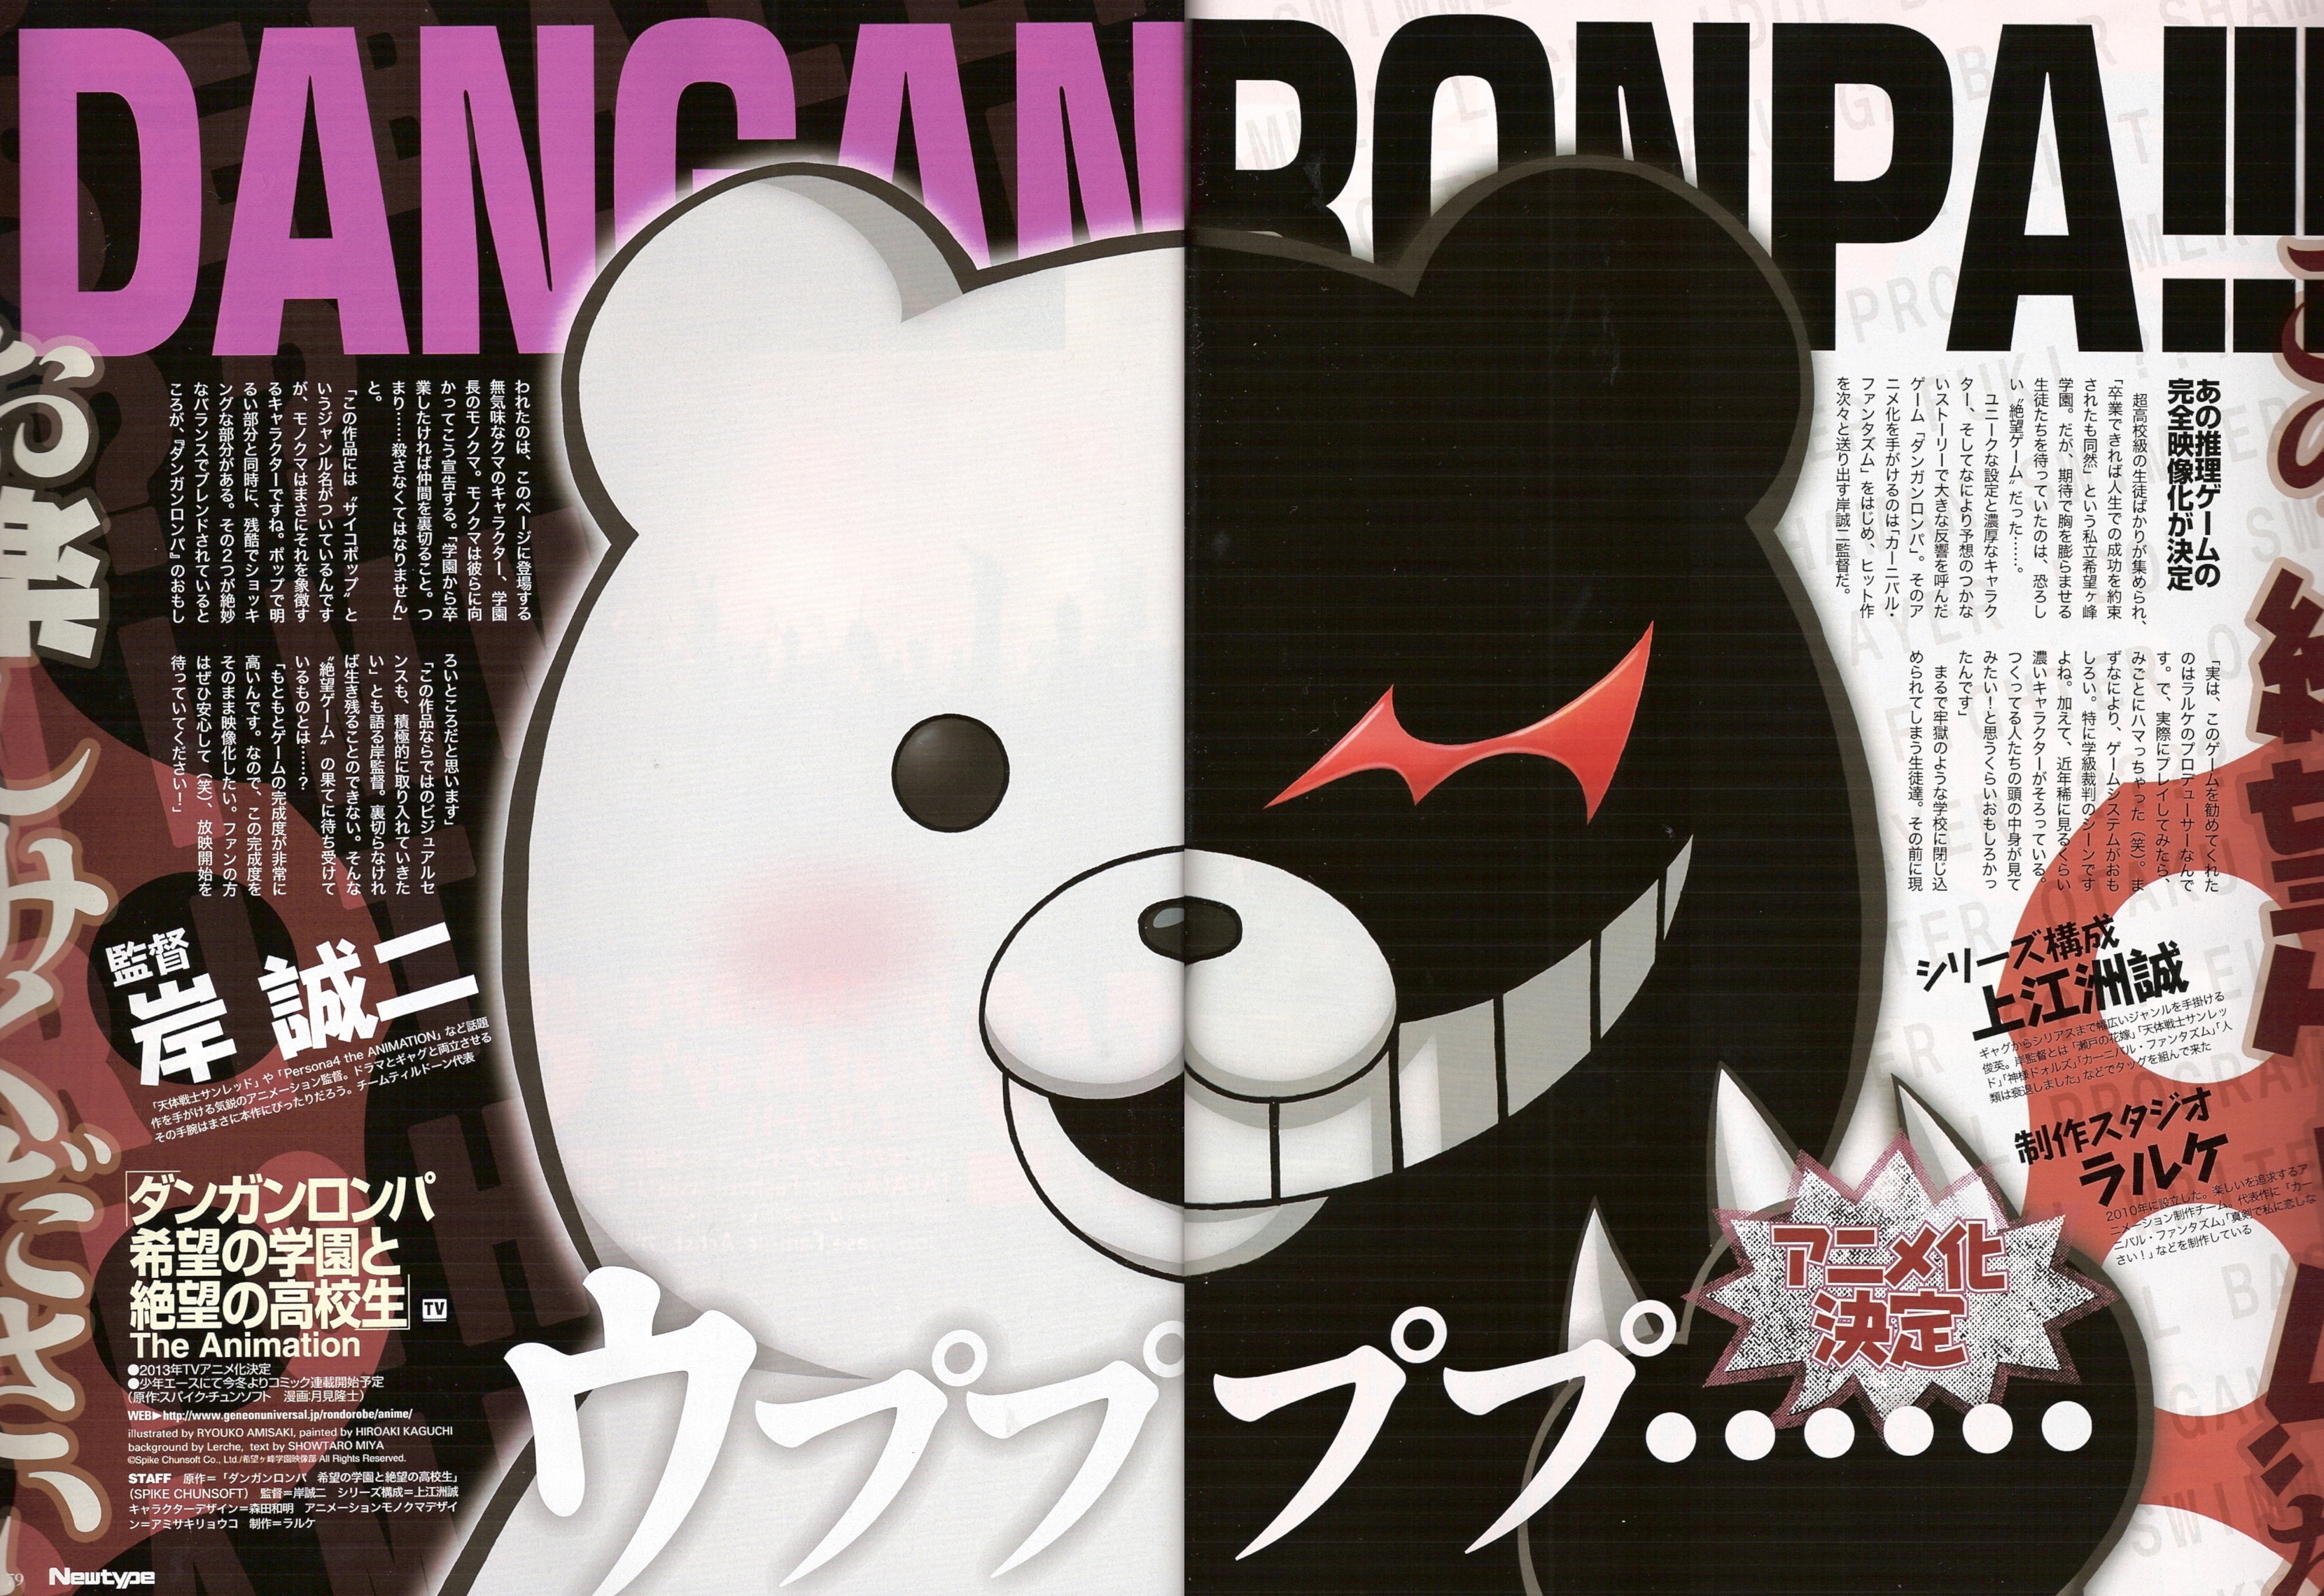 Free Download Danganronpa Monokuma Wallpaper 97 Images In Collection Page 2 33x2280 For Your Desktop Mobile Tablet Explore 41 Monokuma Wallpapers Monokuma Wallpapers